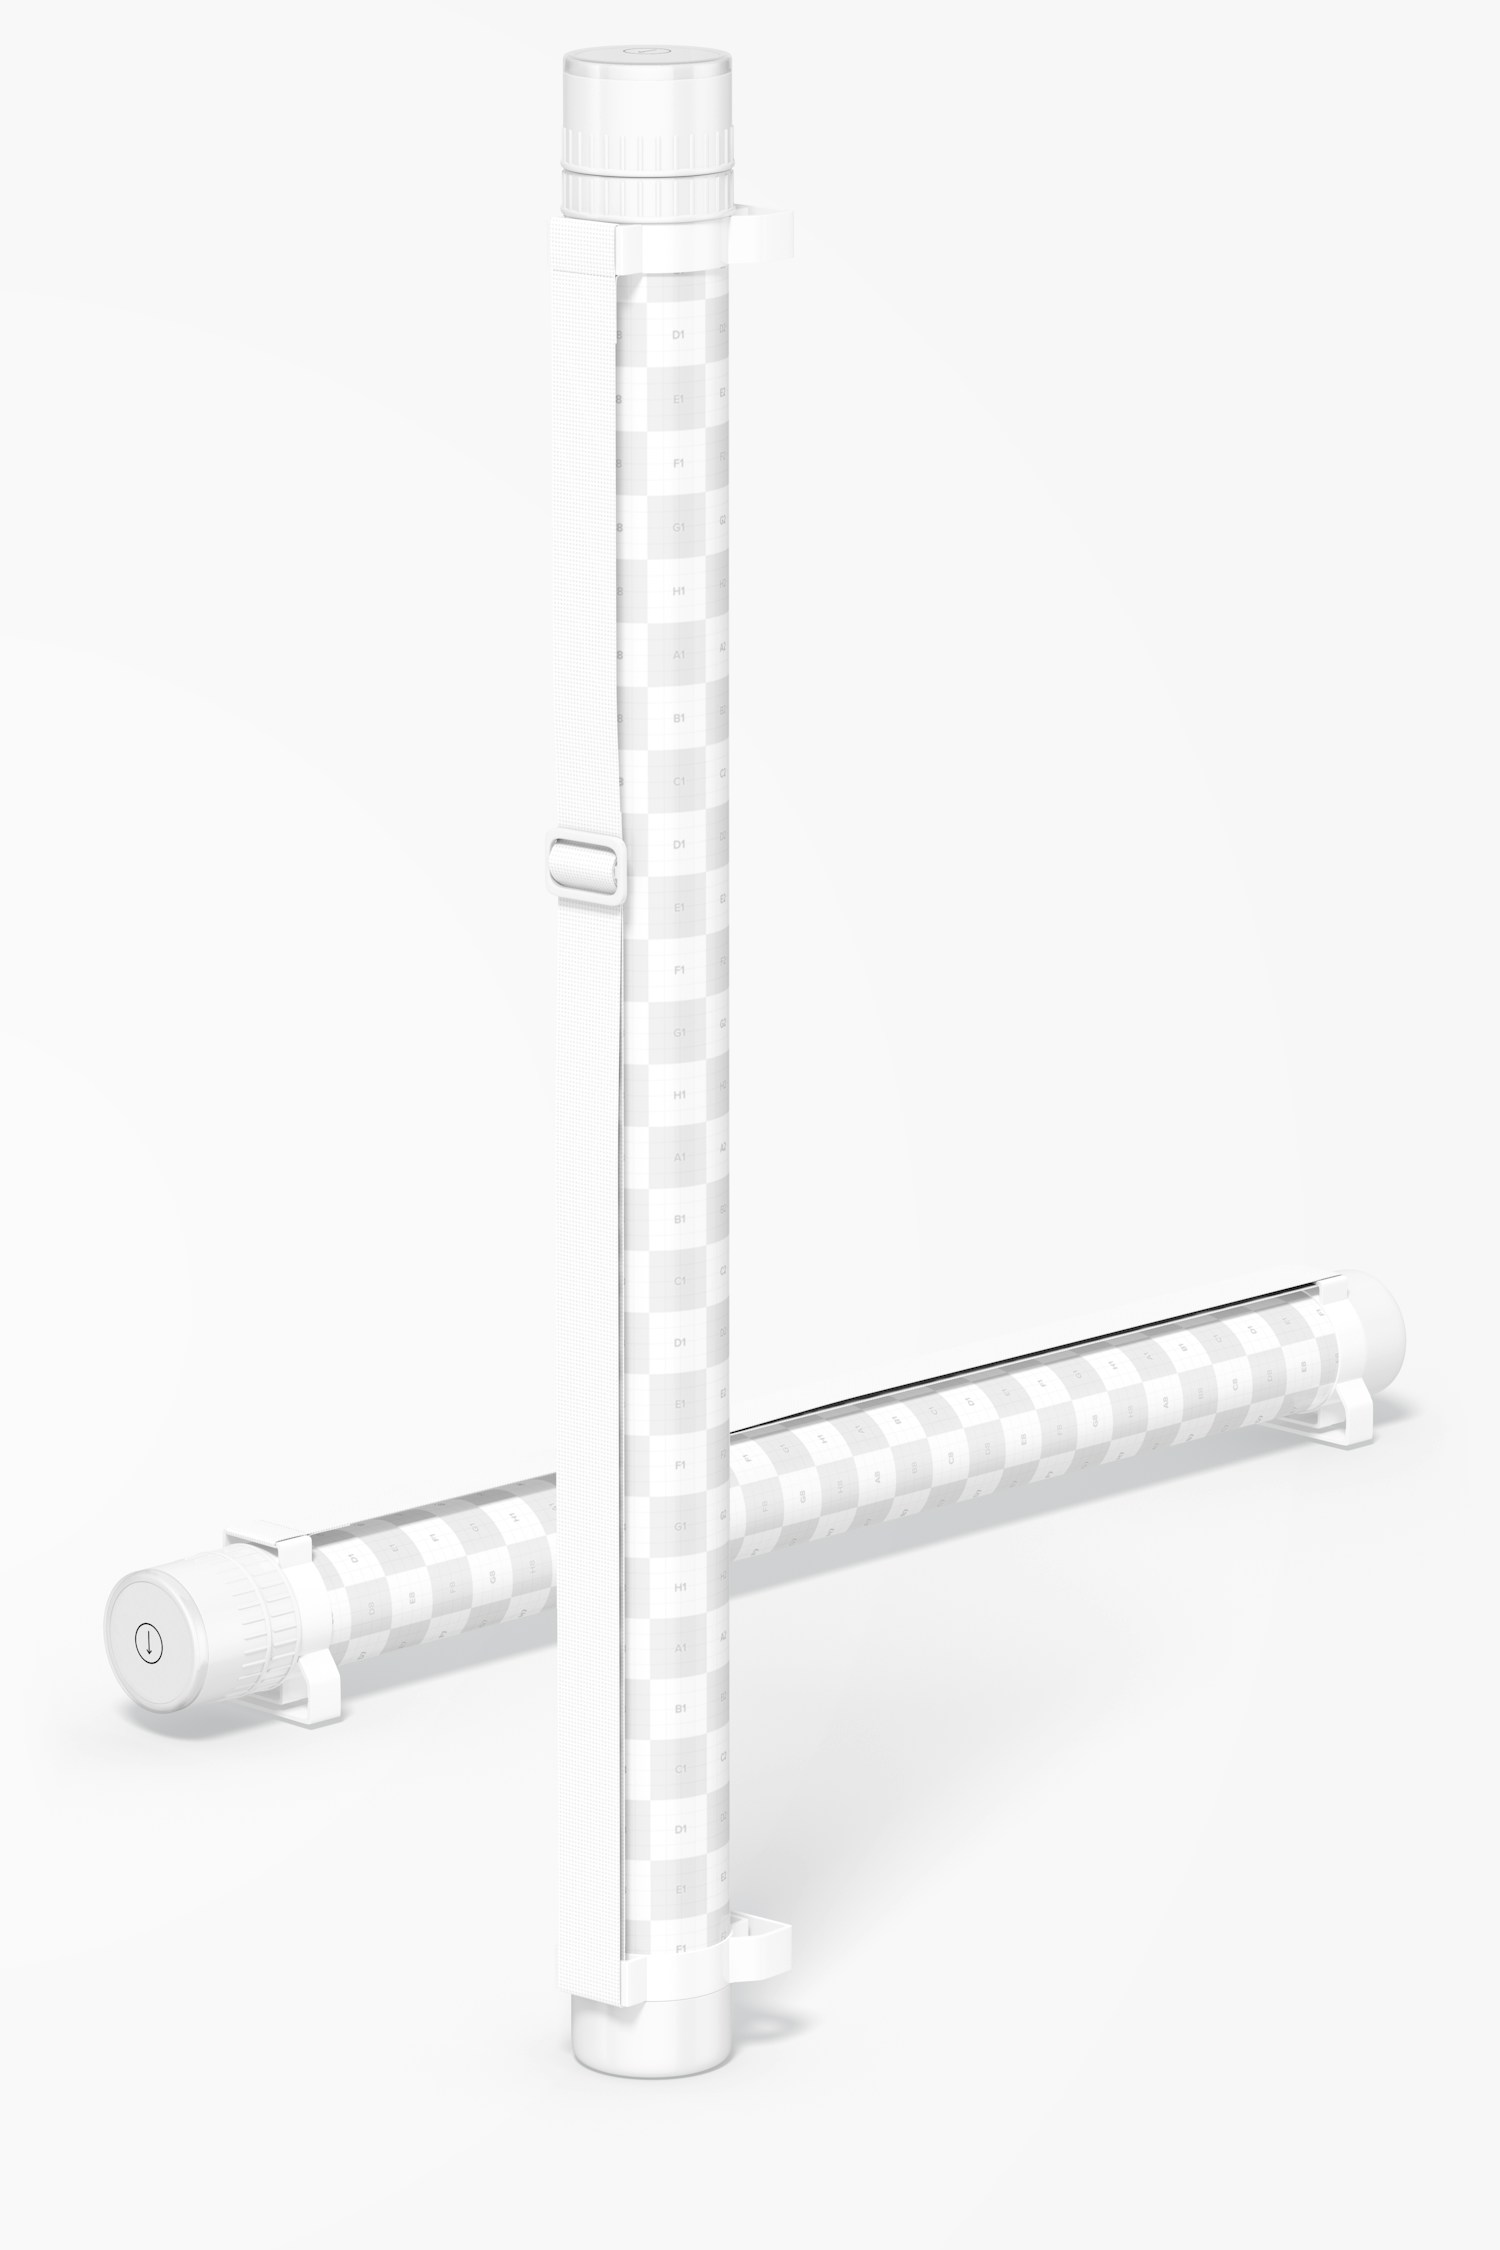 Blueprint Holder Mockup, Standing and Dropped